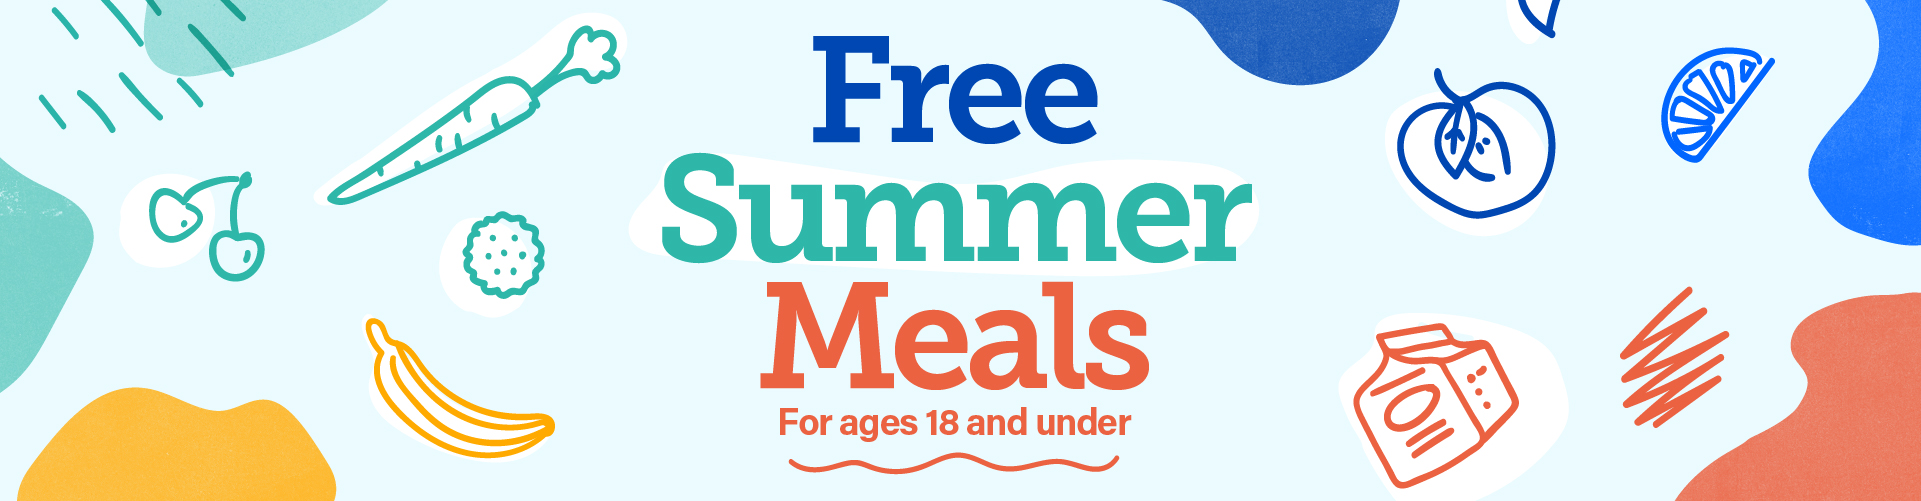 Banner: Free summer meals for ages 18 and under